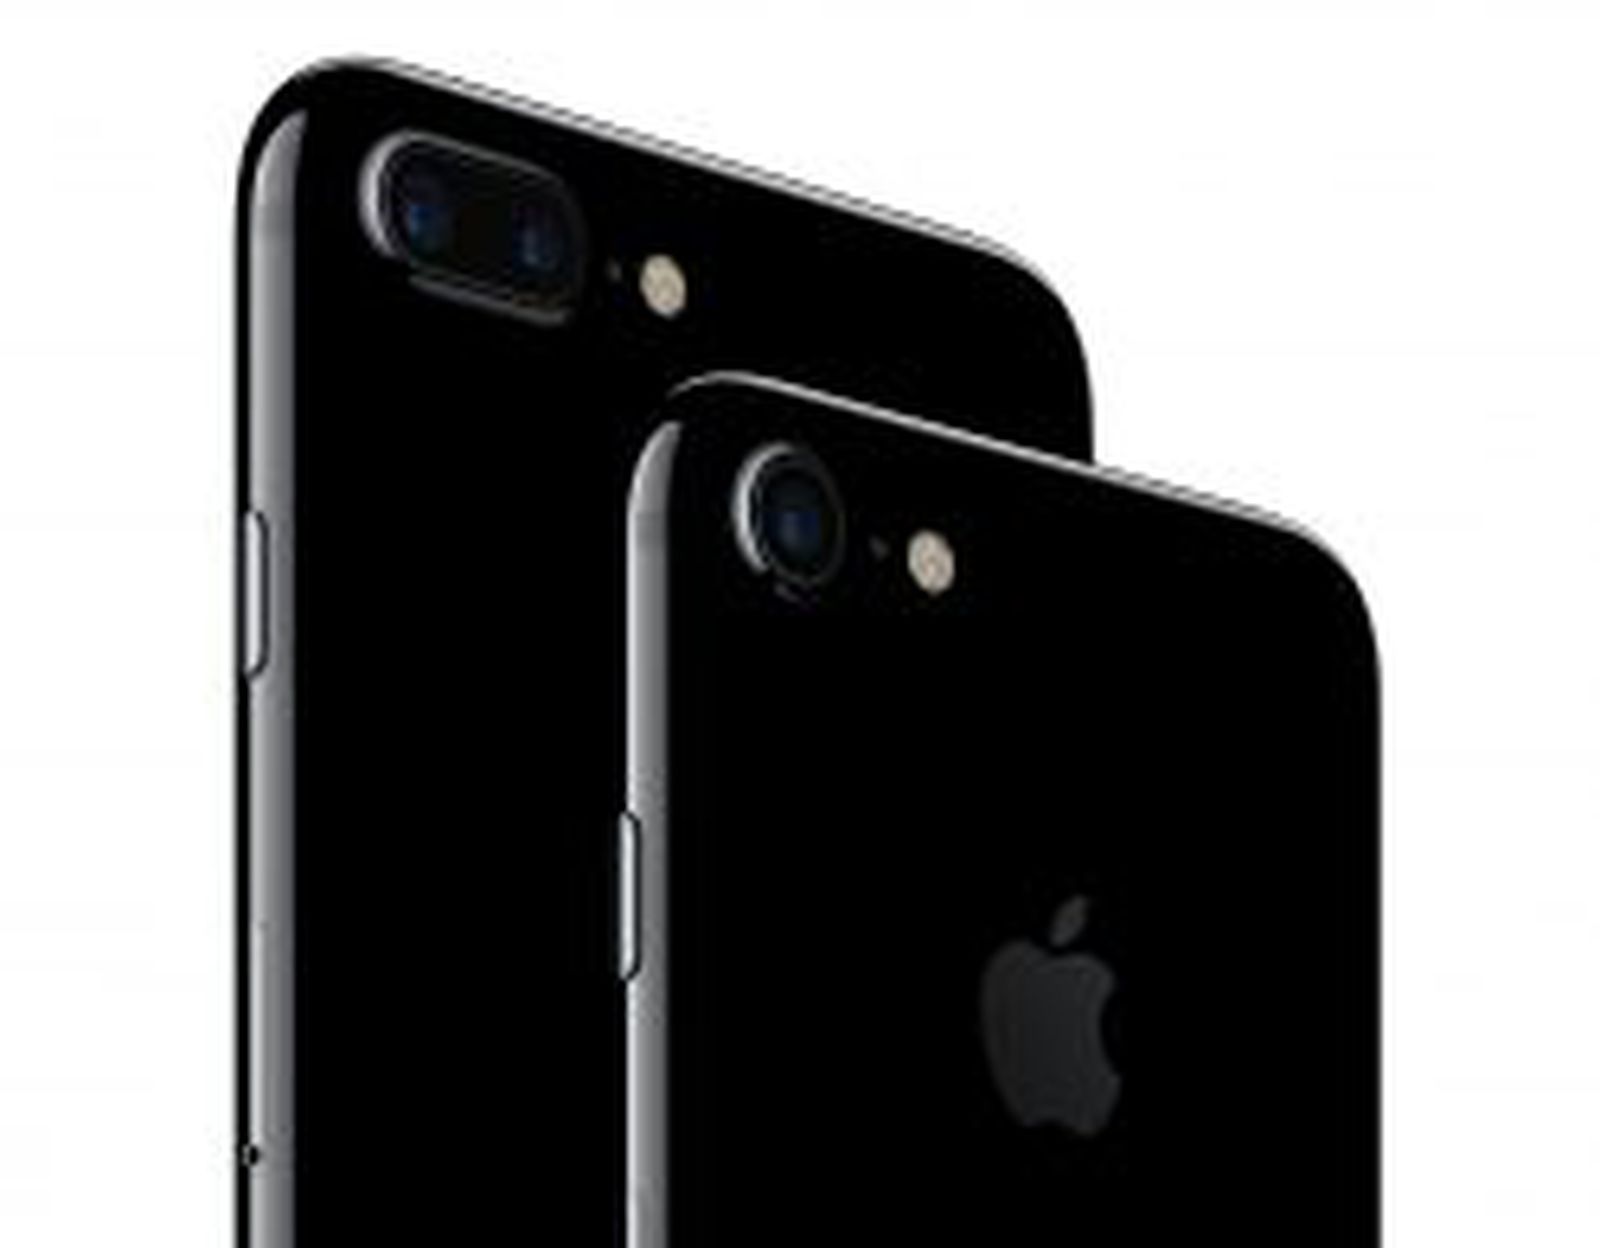 32GB Storage Option Now Available for iPhone 7 in Jet Black Color, Starting at $549